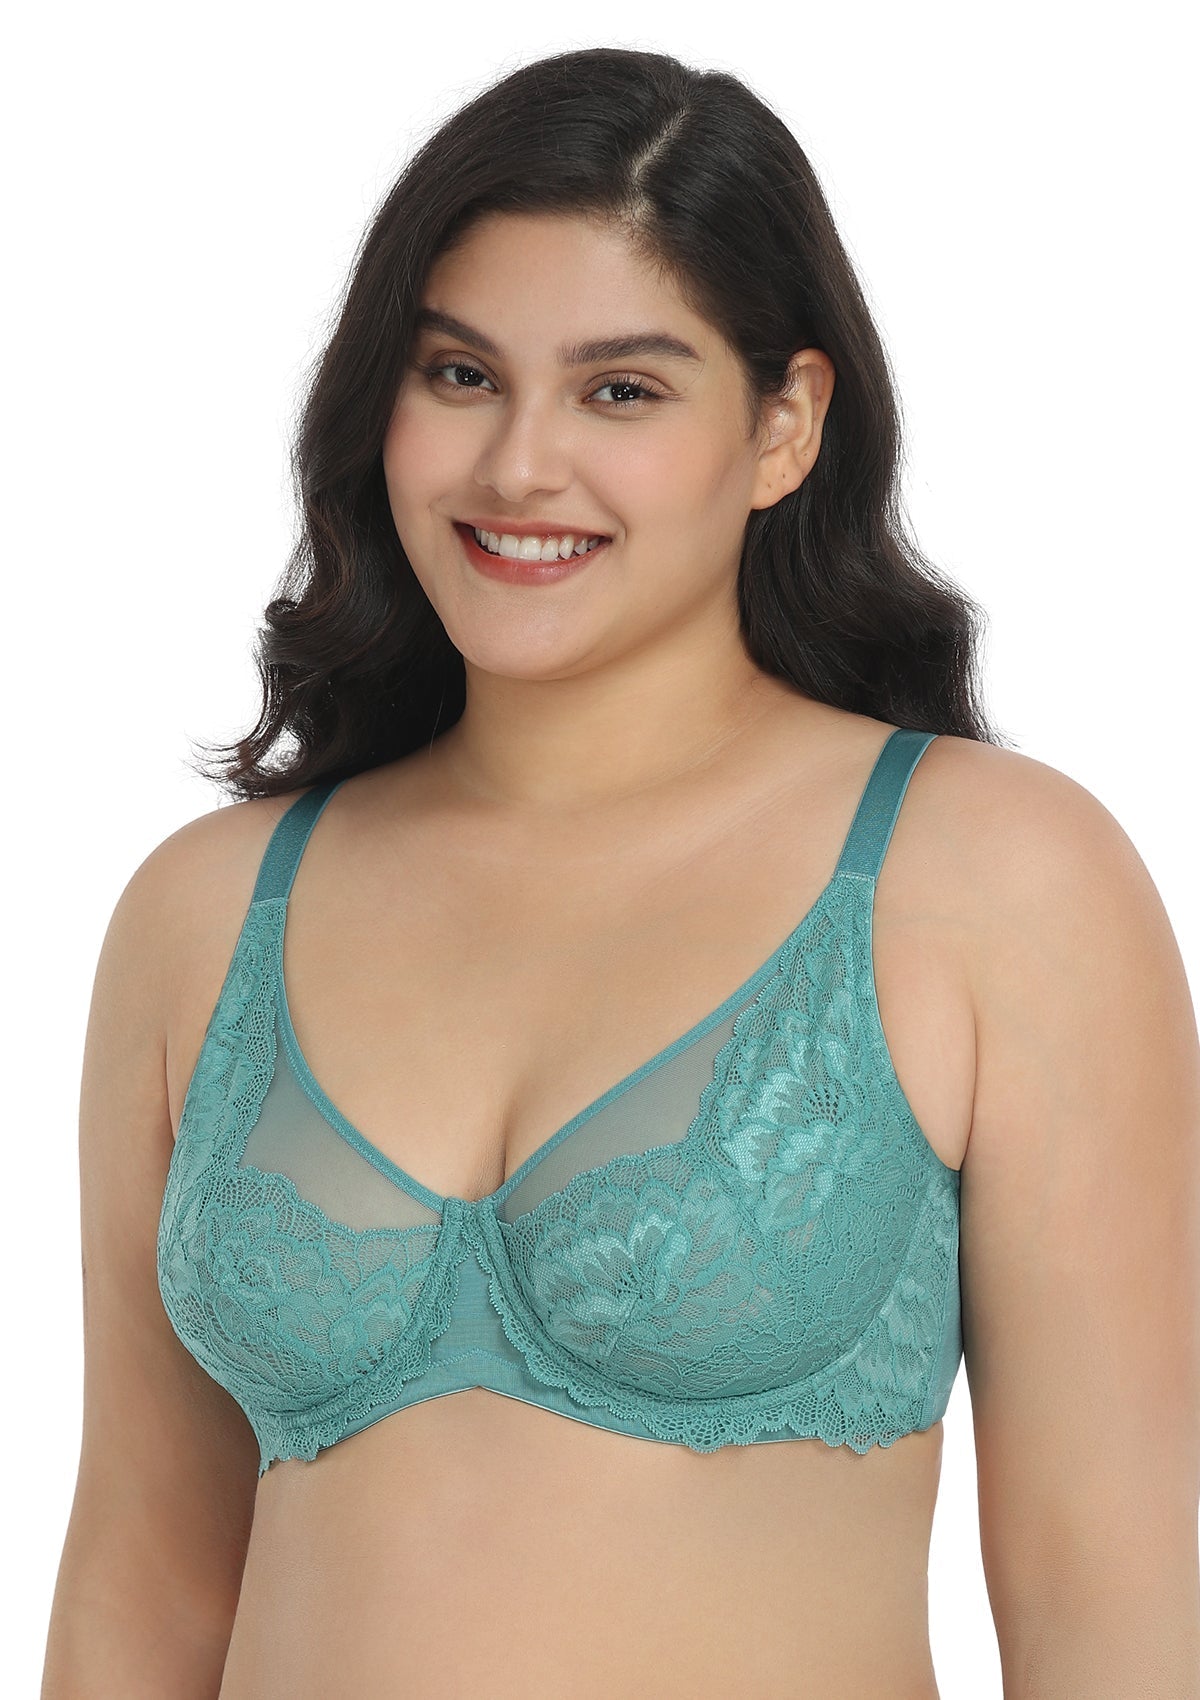 HSIA Paeonia Lace Full Coverage Underwire Non-Padded Uplifting Bra - Purple / 42 / D